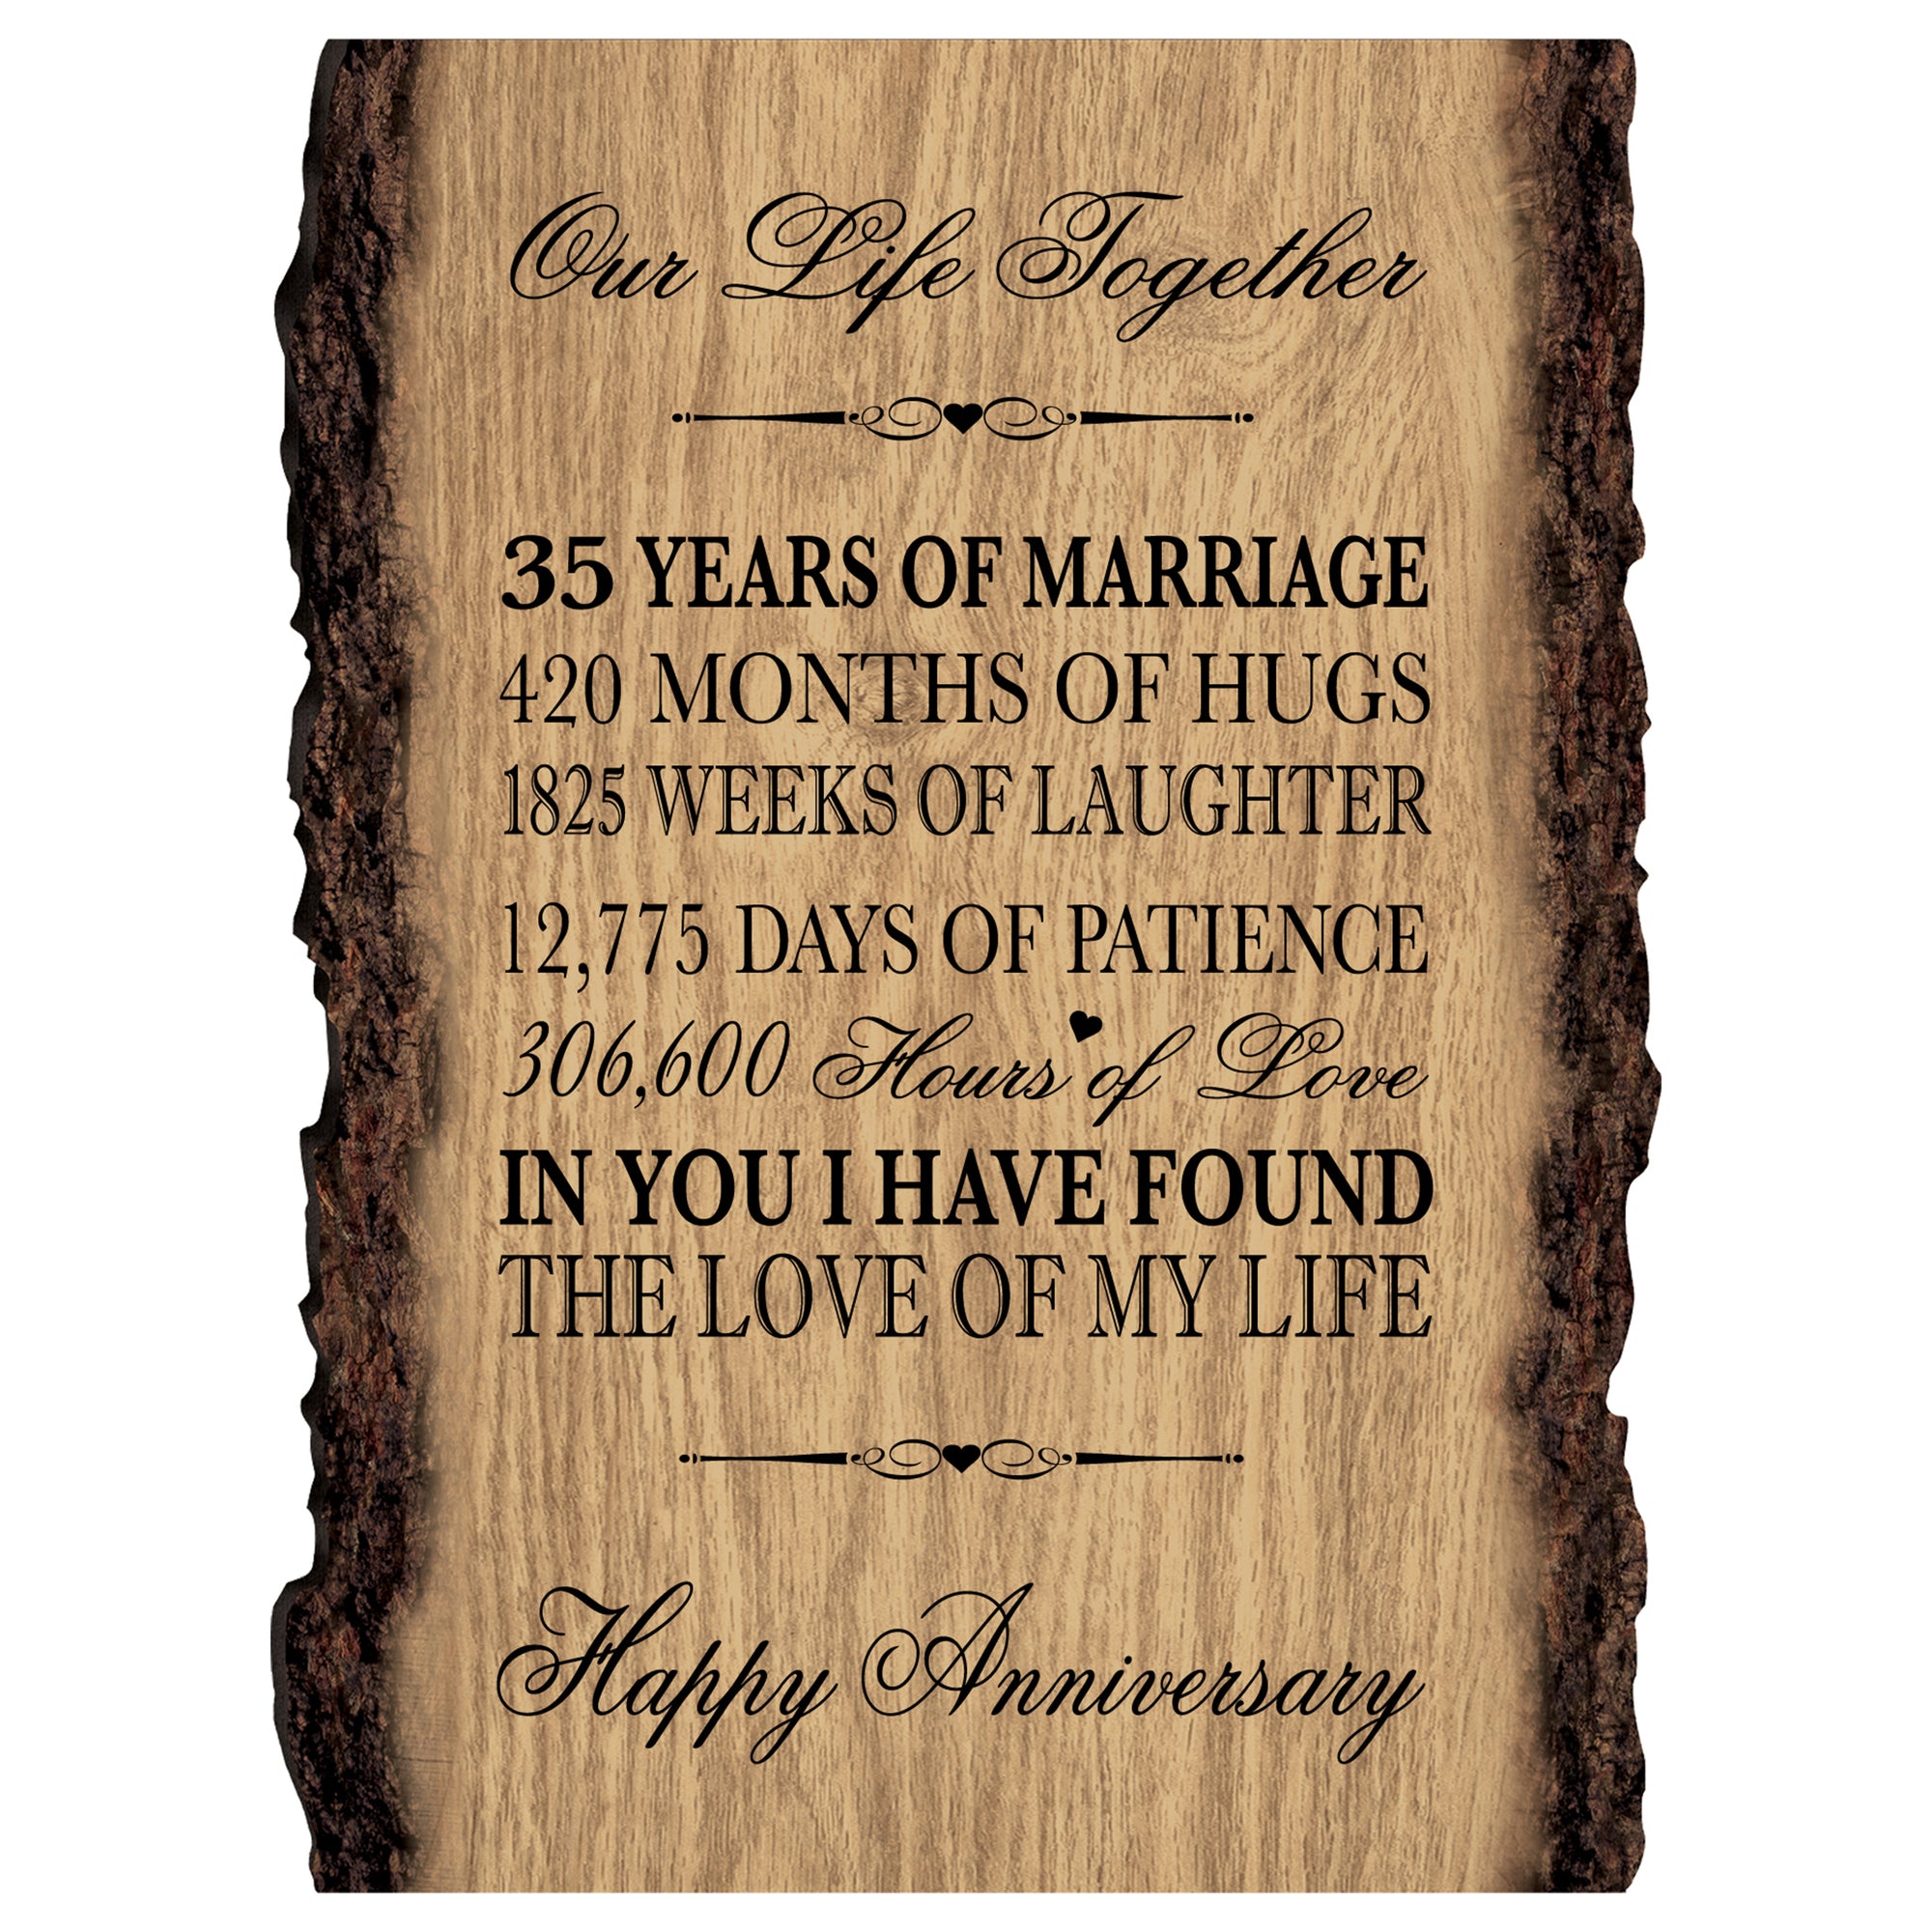 Rustic Wedding Anniversary 9x12 Barky Wall Plaque Gift For Parents, Grandparents New Couple - 35 Years Of Marriage